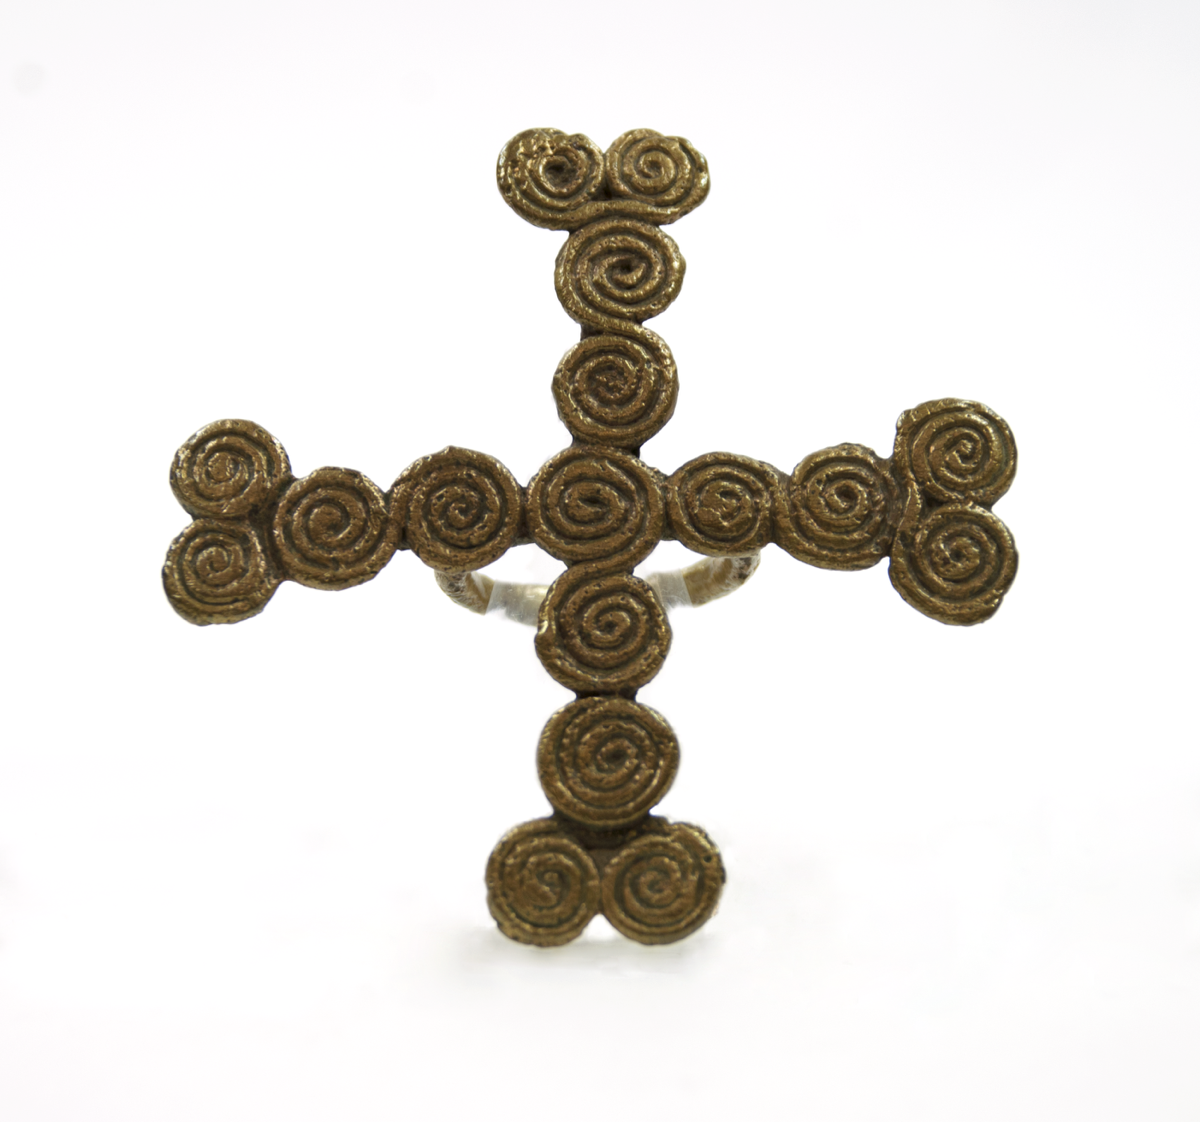 A brass ring with a cross formed of spirals, with two spirals at the top.